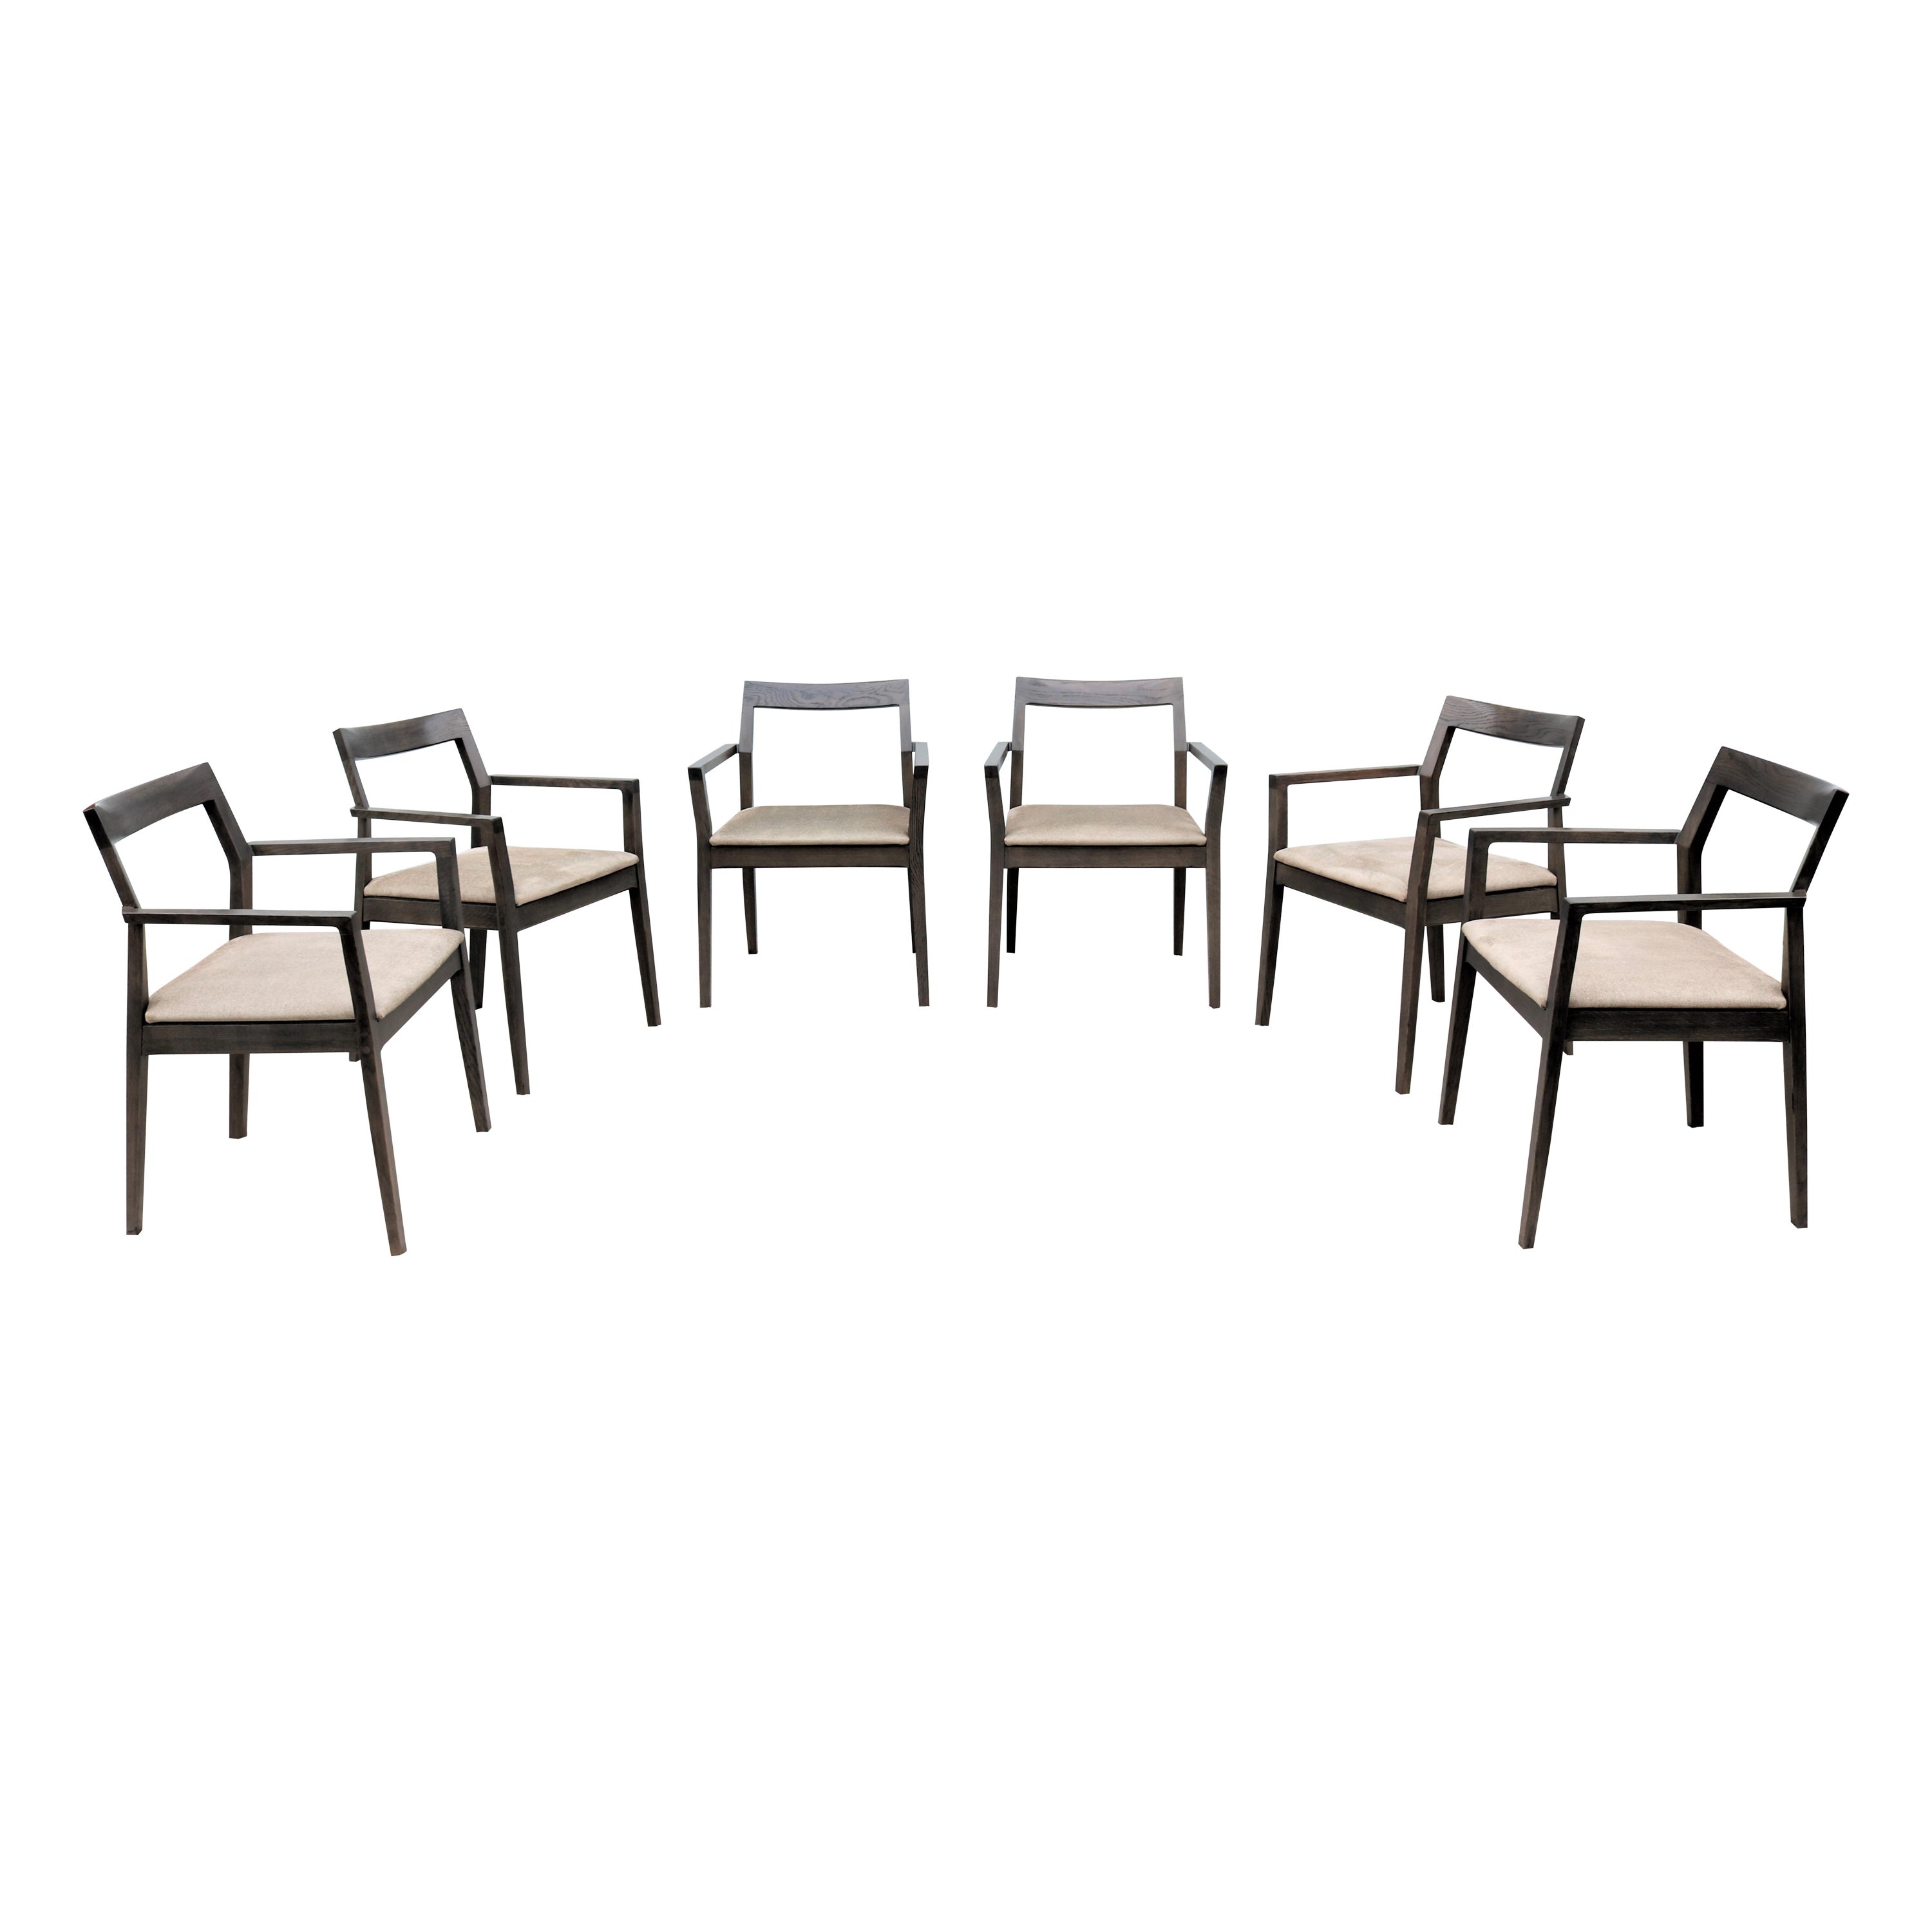 Contemporary Marc Krusin for Knoll Krusin Wood Side Dining Armchair, Set of 6 For Sale